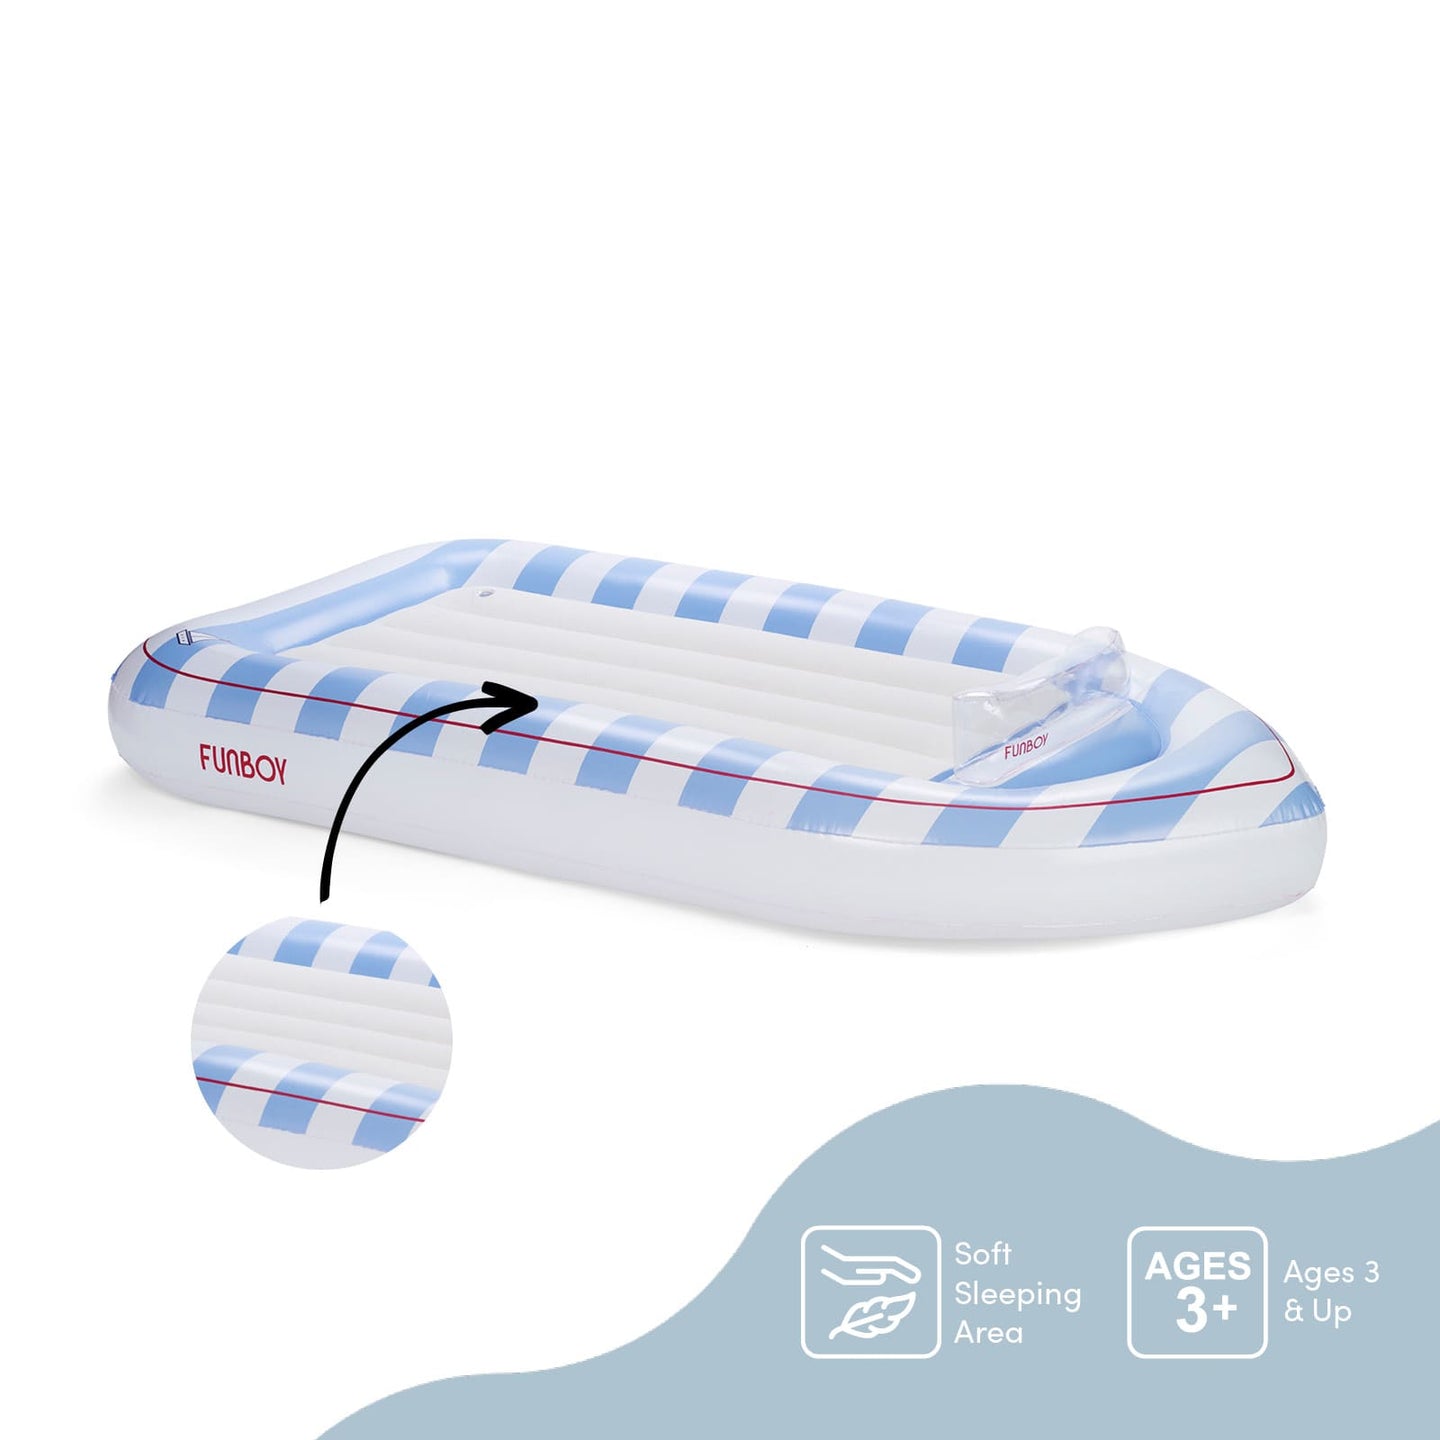 Kids Air Mattress - Classic Speed Boat Sleepover Bed